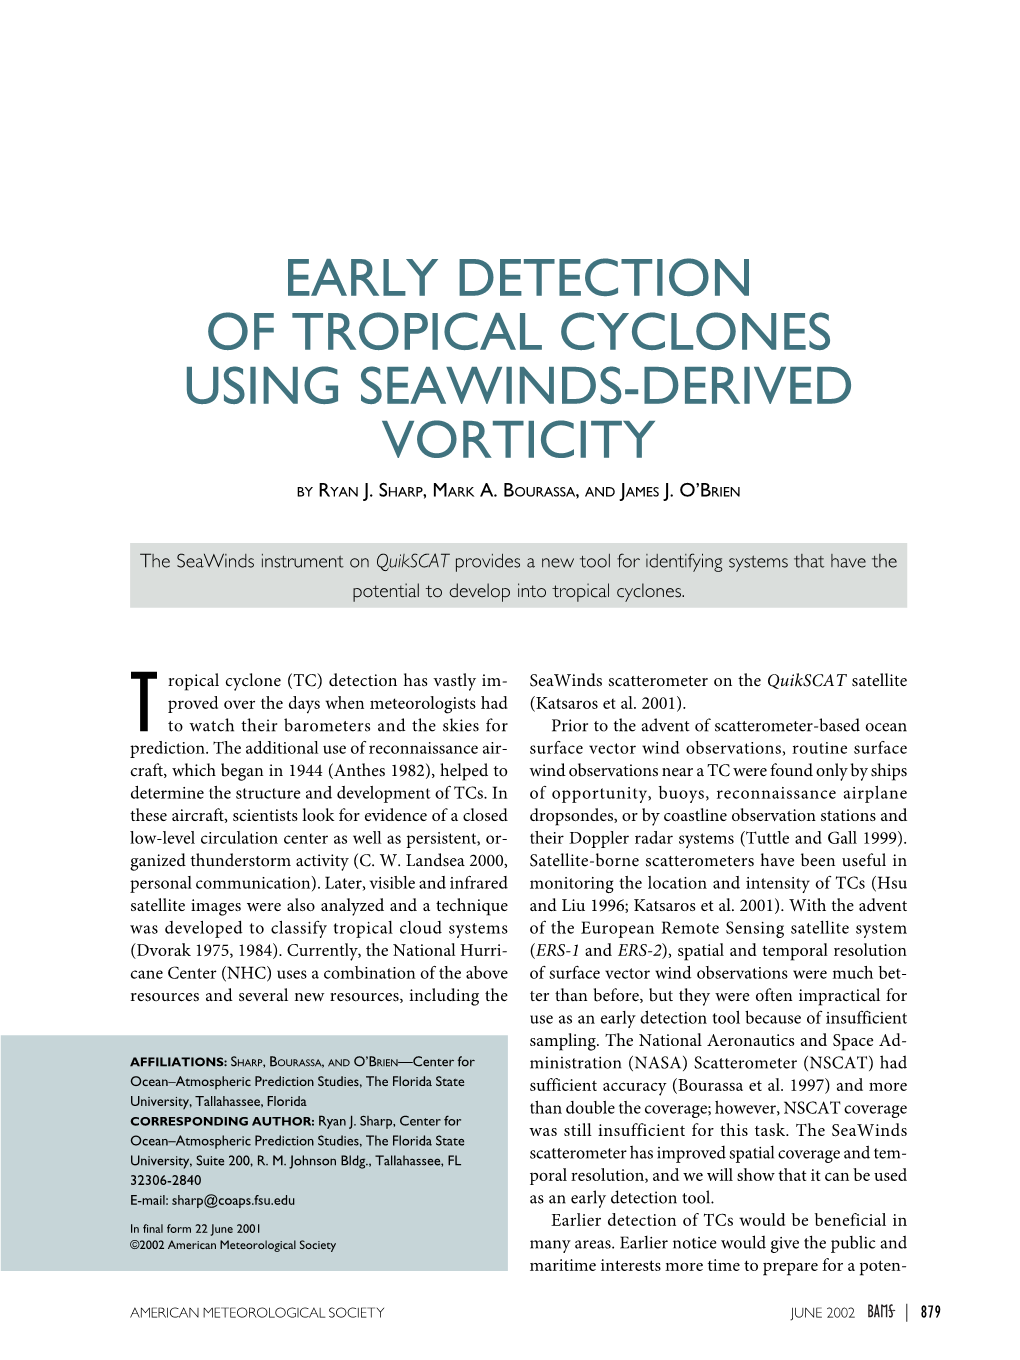 Early Detection of Tropical Cyclones Using Seawinds-Derived Vorticity